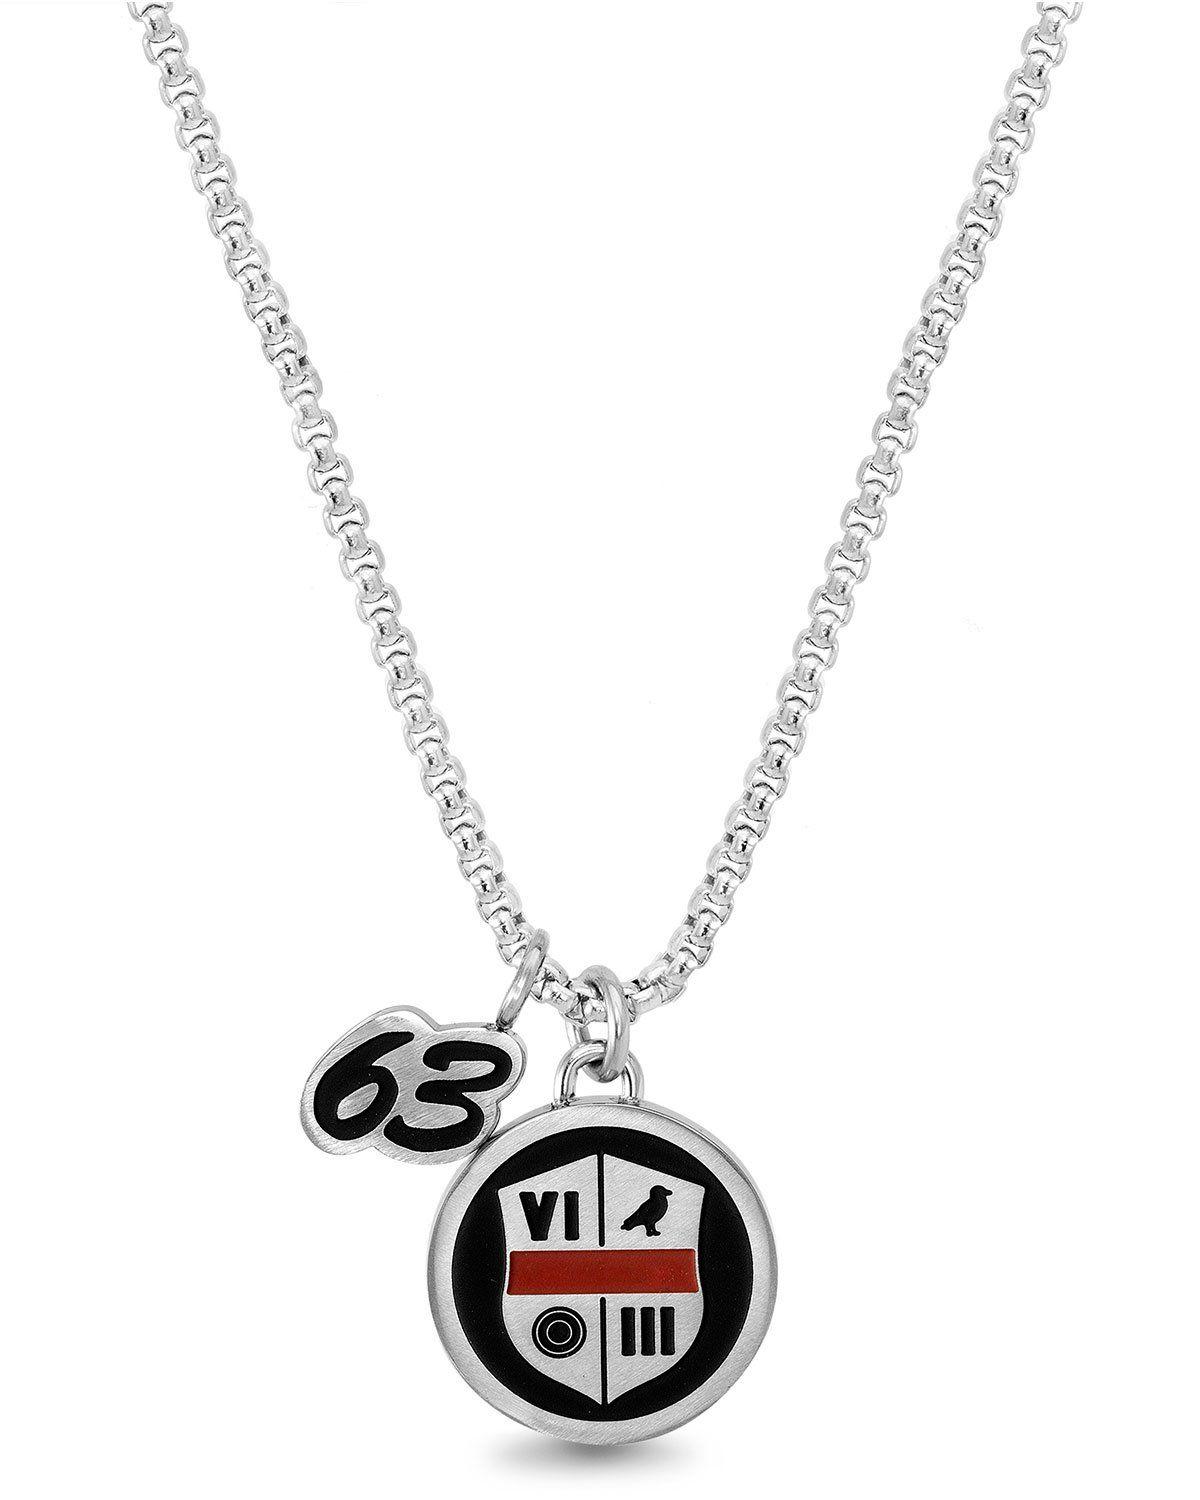 Silver and Red Shield Logo - Black & Red Shield w/ Roman Numeral Necklace